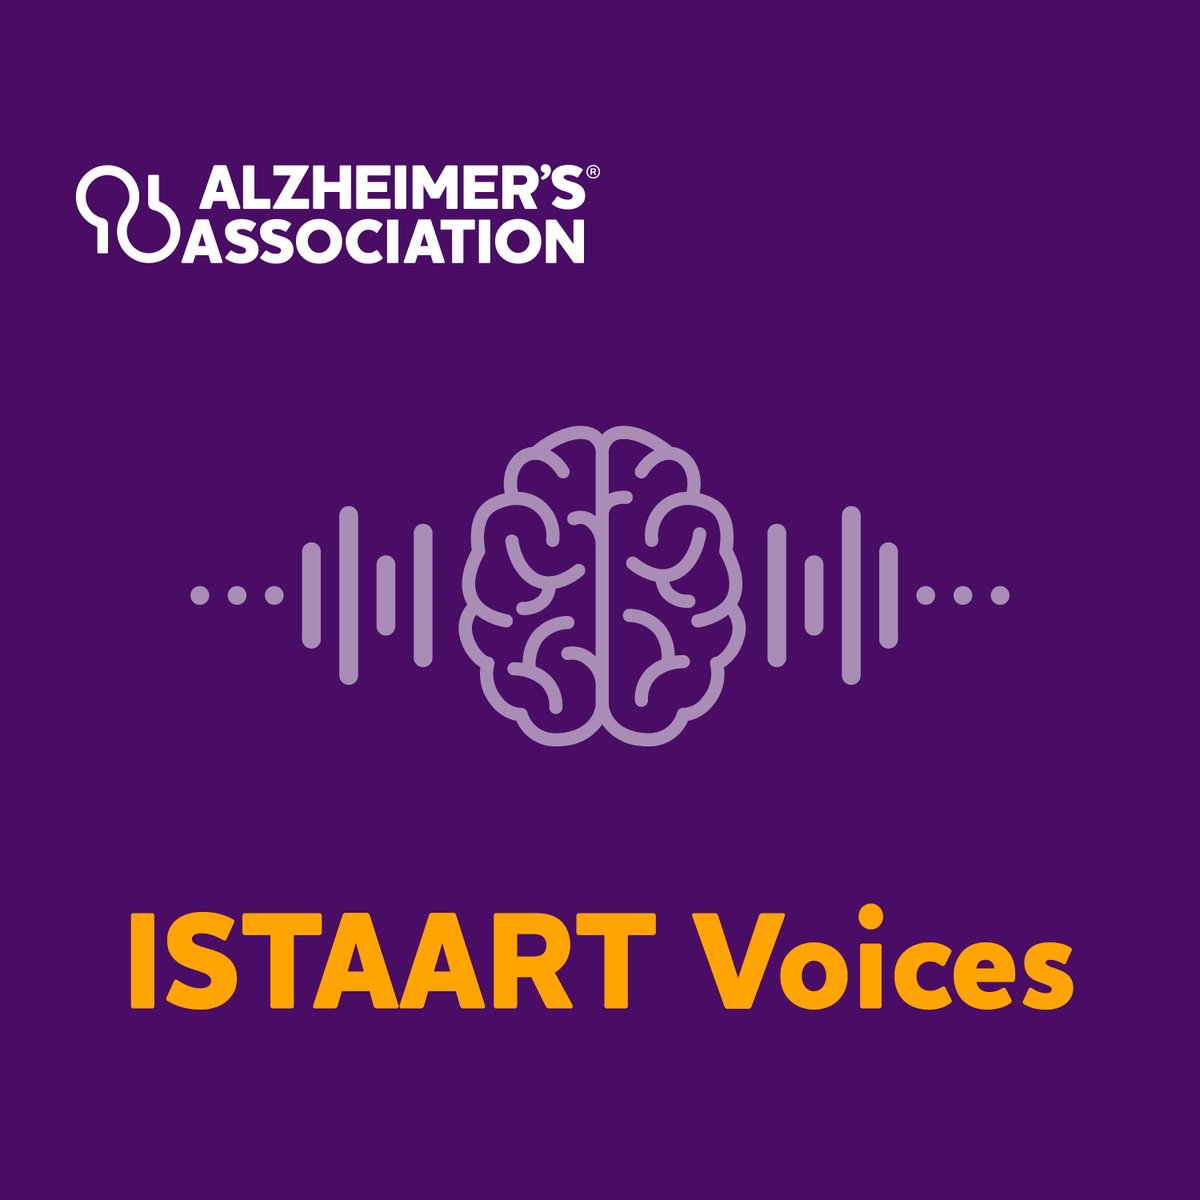 Introducing ISTAART Voices–a podcast exploring the latest dementia research with study authors. This is yet another way ISTAART members can stay up to date in addition to their year-round benefits. Not an ISTAART member? Tune in to the podcast and sign up! alz.org/ISTAARTpodcast